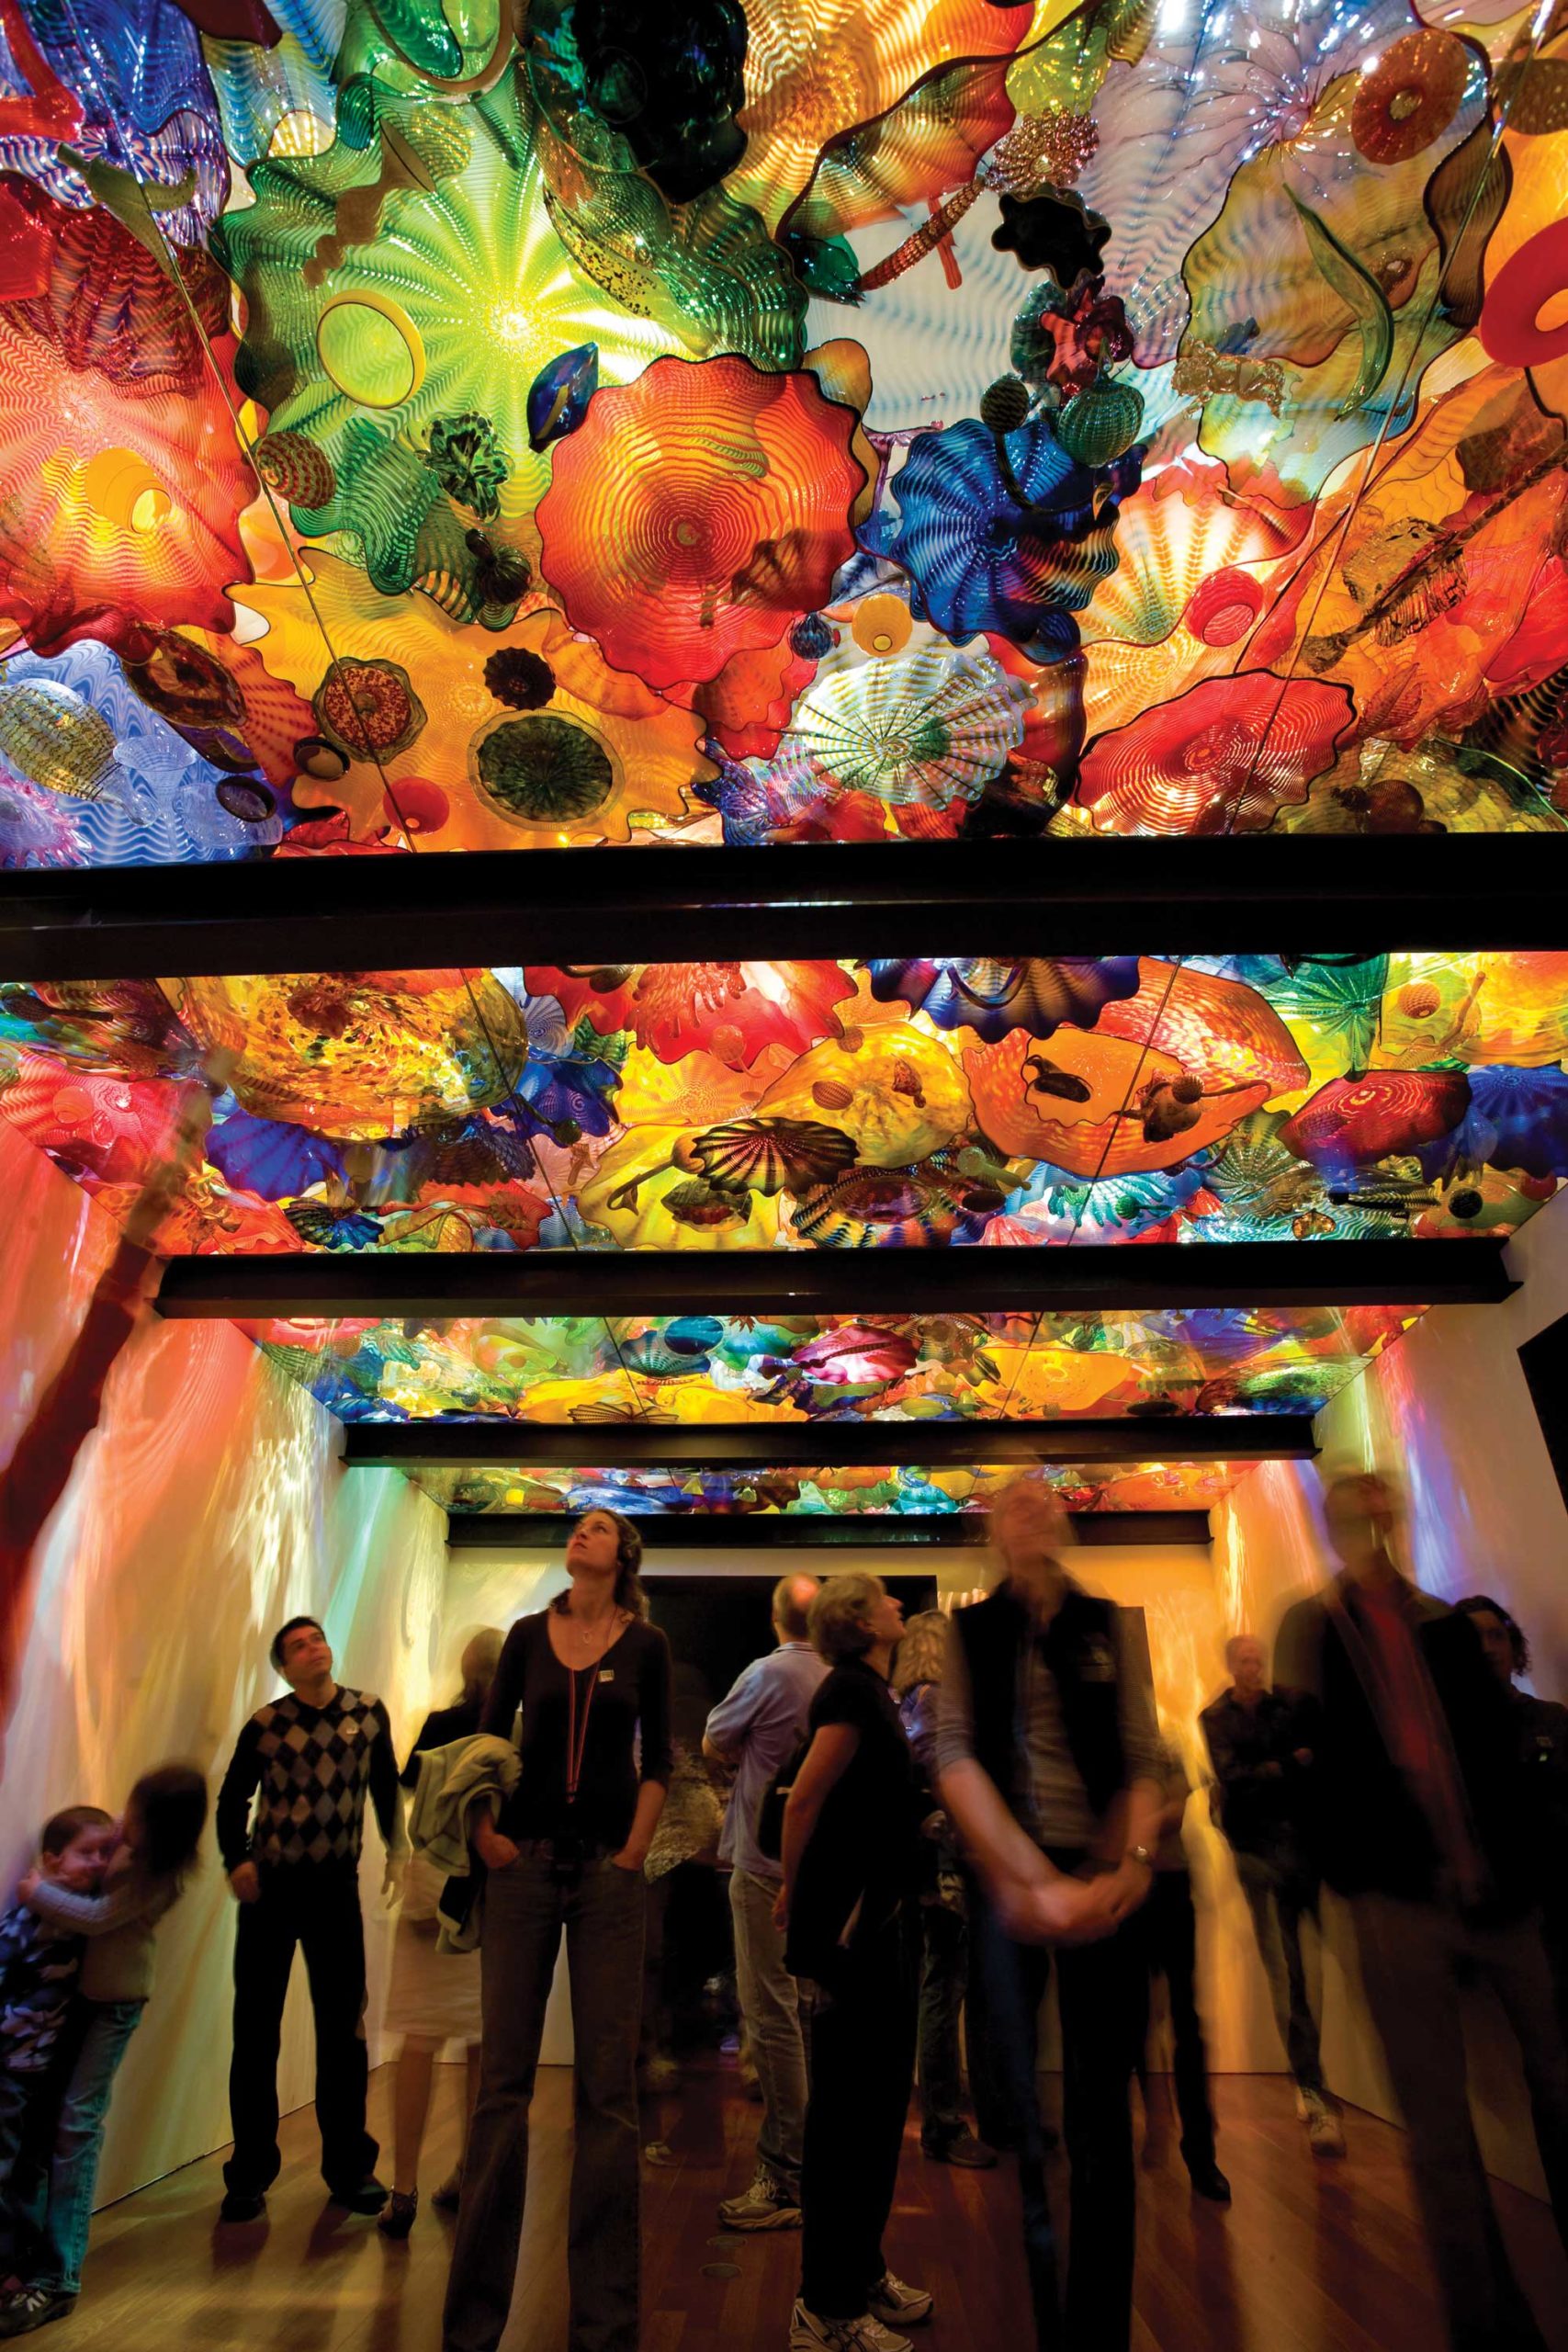 Persian Ceiling, 1999, de Young Museum, San Francisco, installed 2008, photo: Teresa Nouri Rishel © Chihuly Studio; all rights reserved